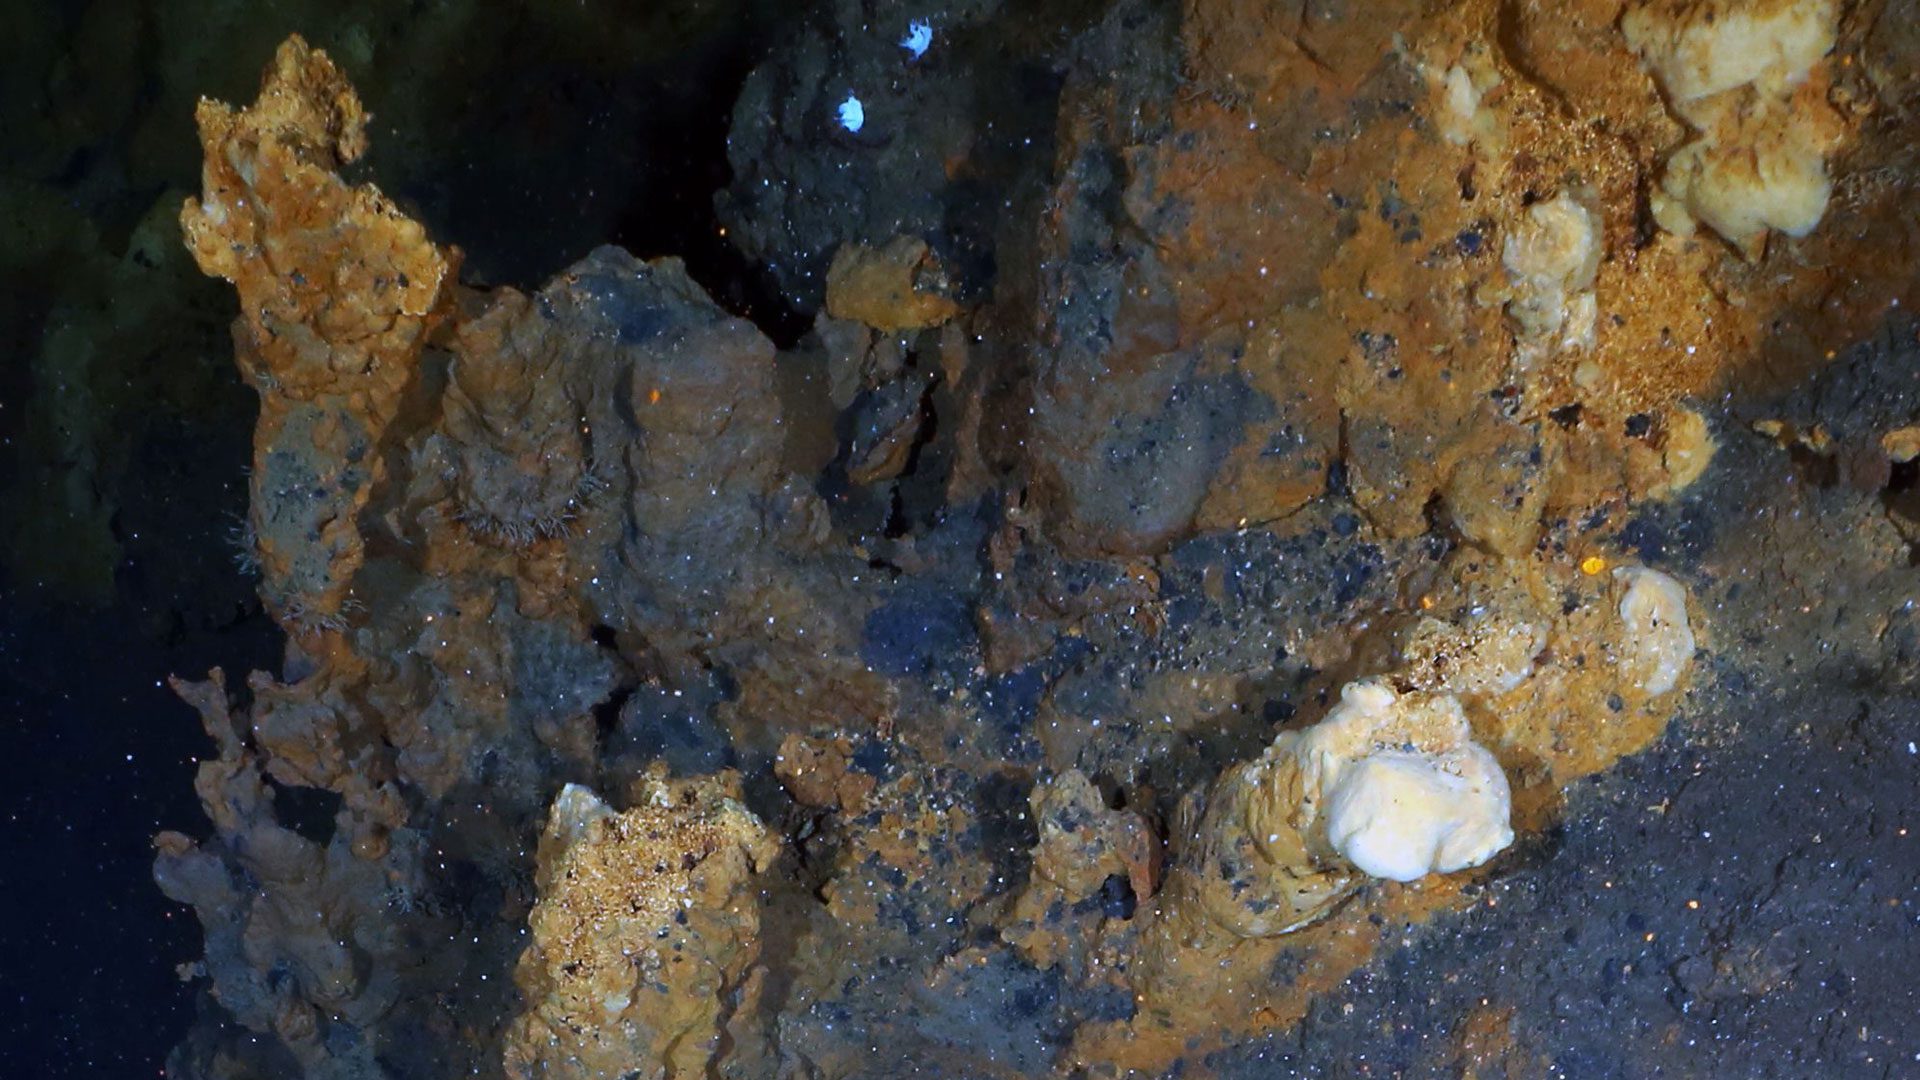 Hydrothermal Vent Site Expands The Estimates Of Seafloor Mineral Deposits